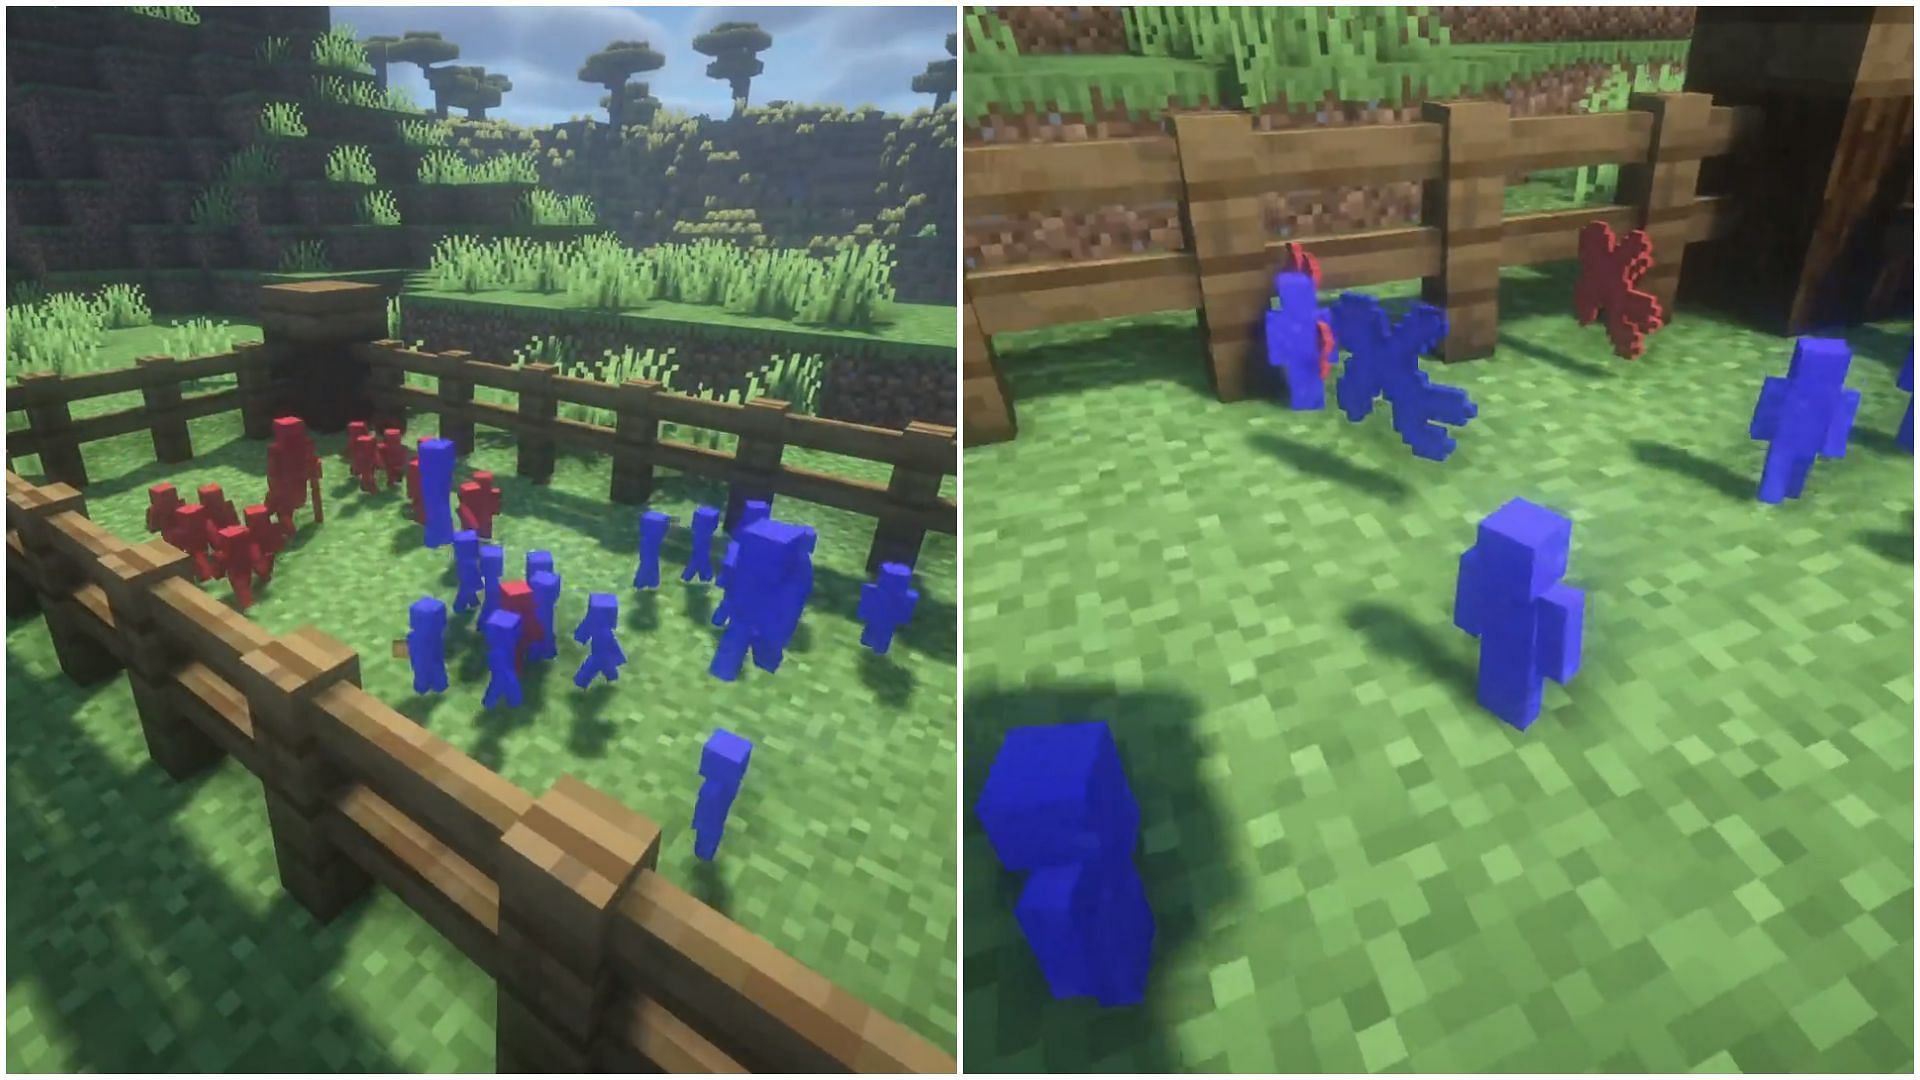 Minecraft Redditor showcases mod that adds adorable clay soldiers to the game (Image via Reddit/u/Twurti)